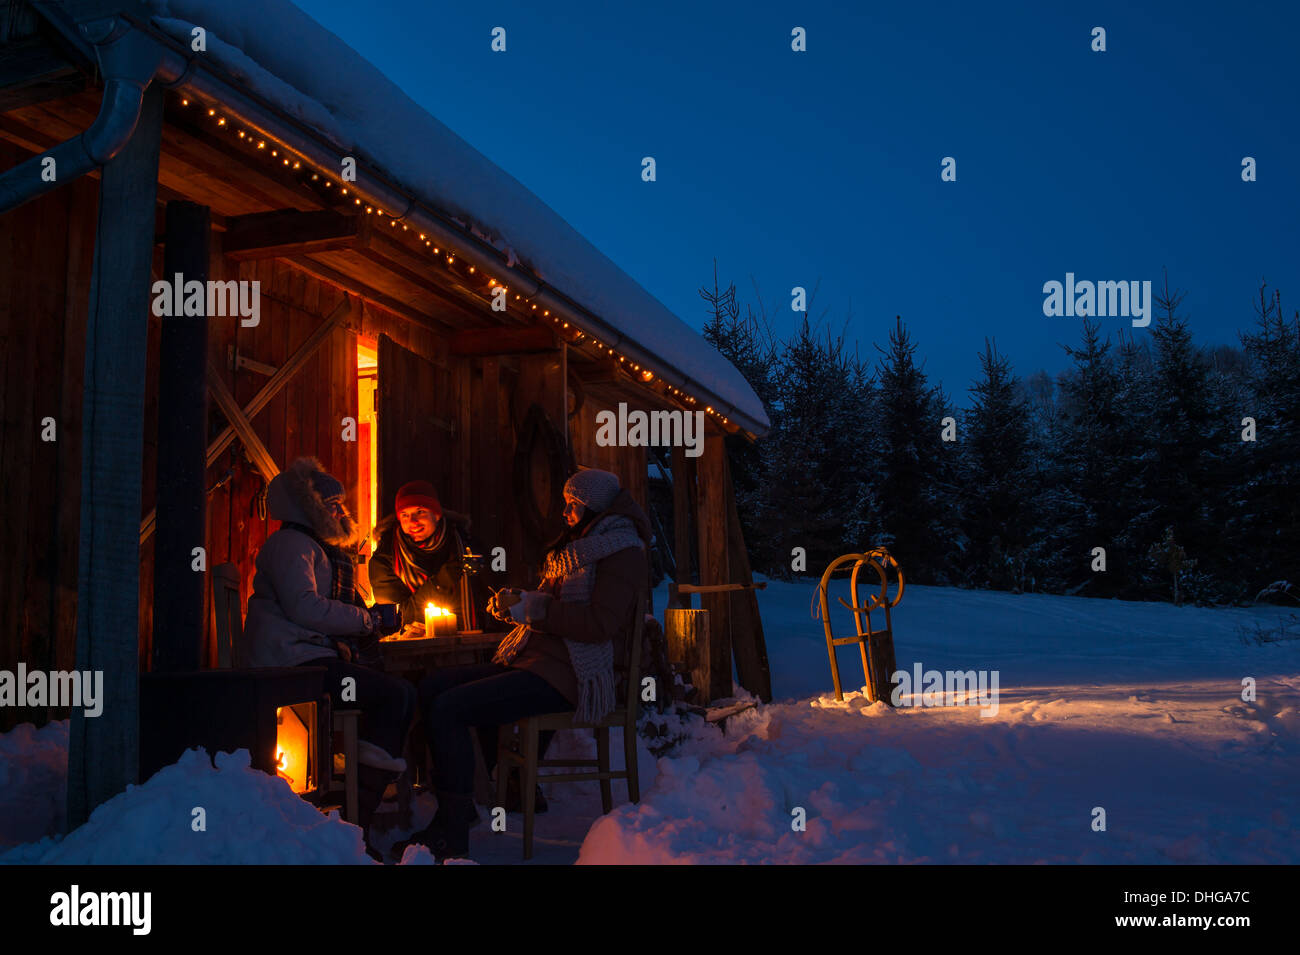 Evening winter cottage friends enjoy hot drinks in snow countryside Stock Photo